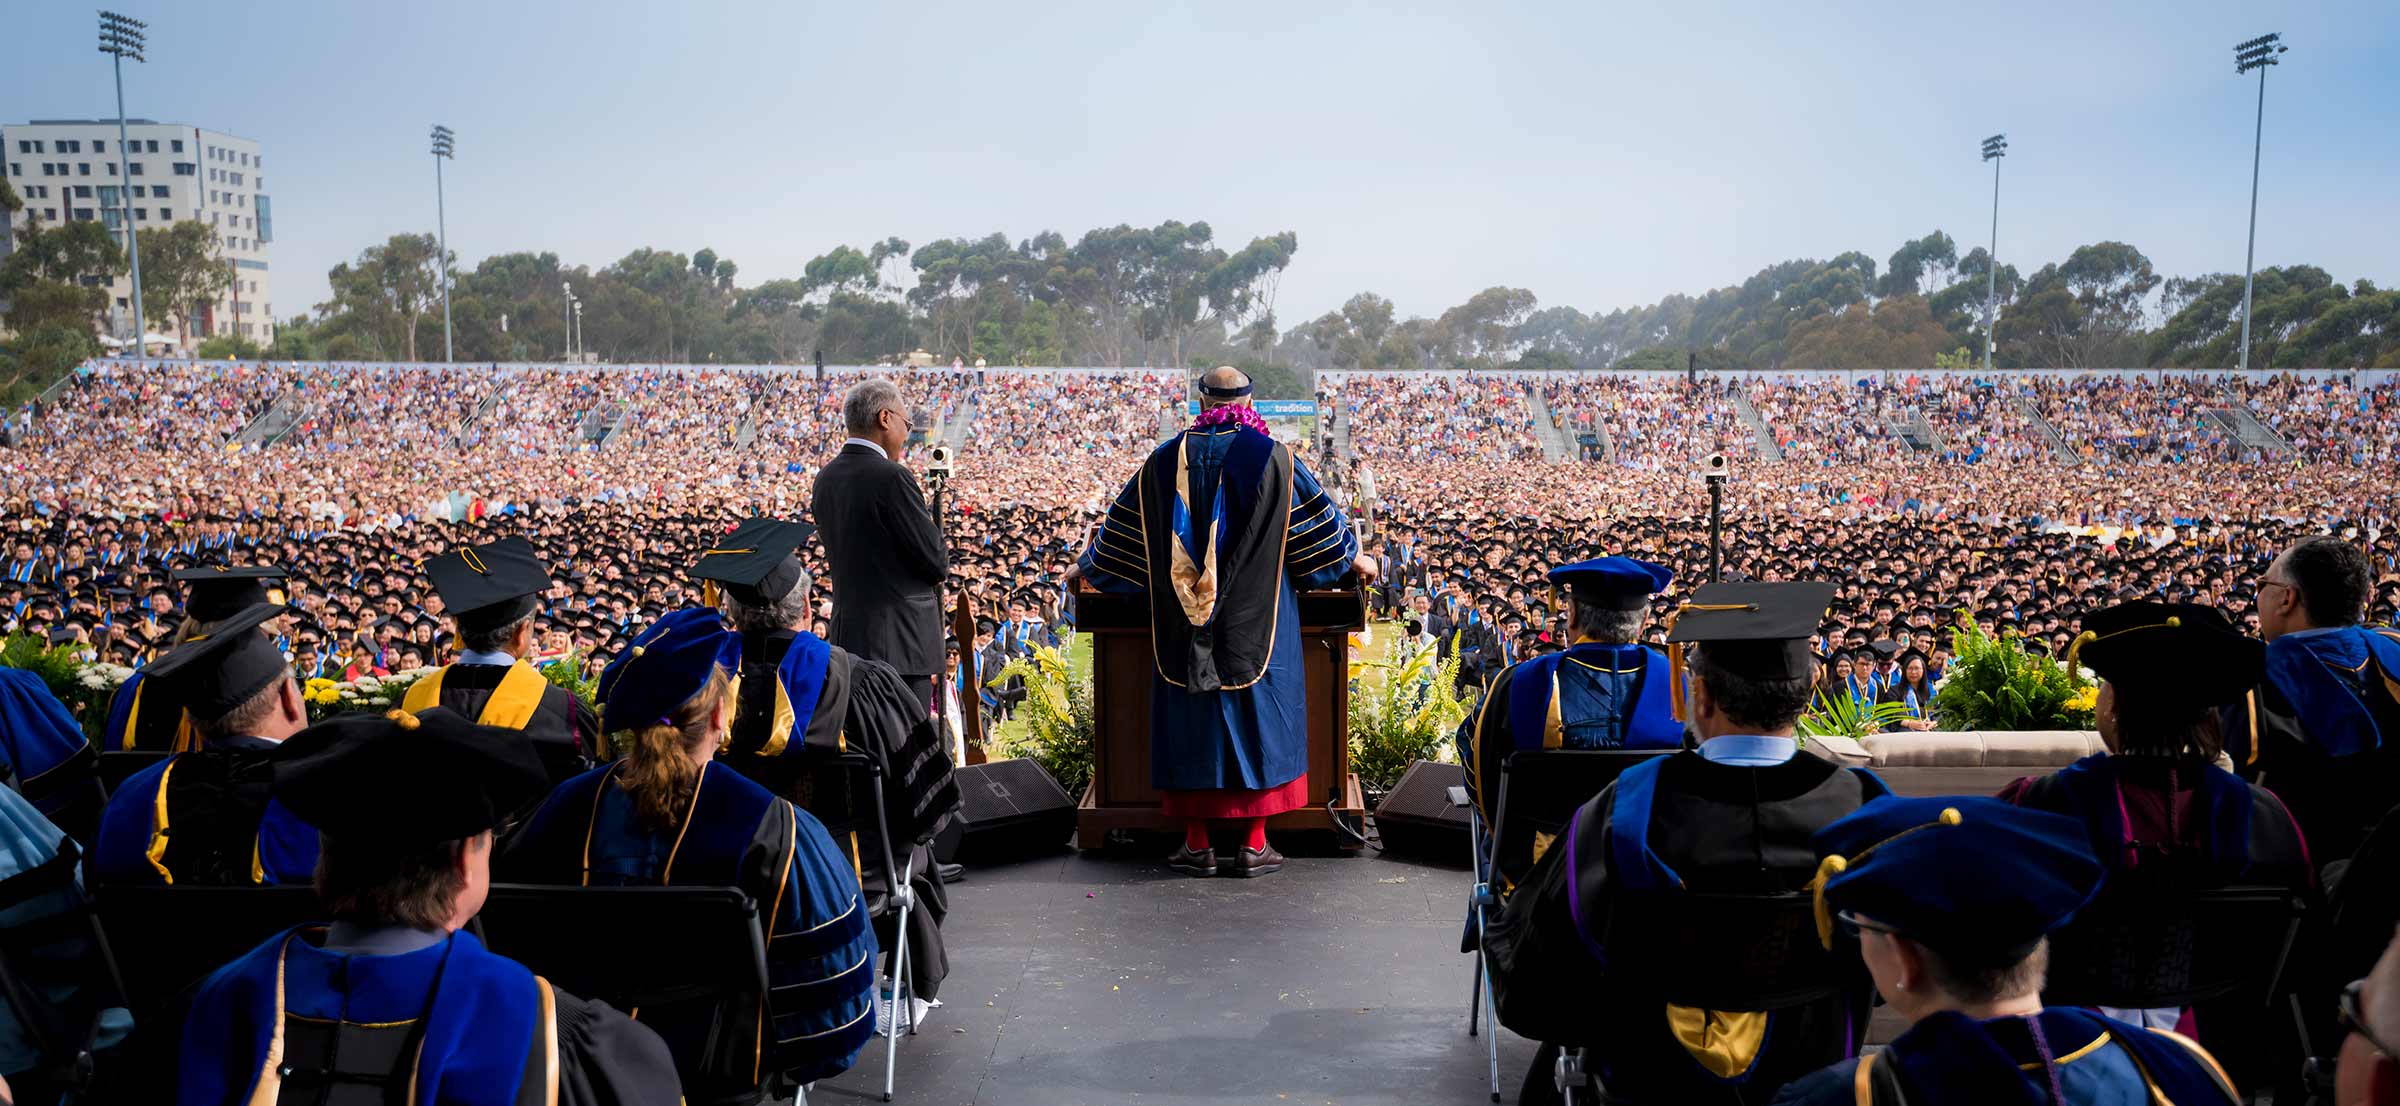 UC San Diego Commencement Keynote Address His Holiness the 14th Dalai Lama